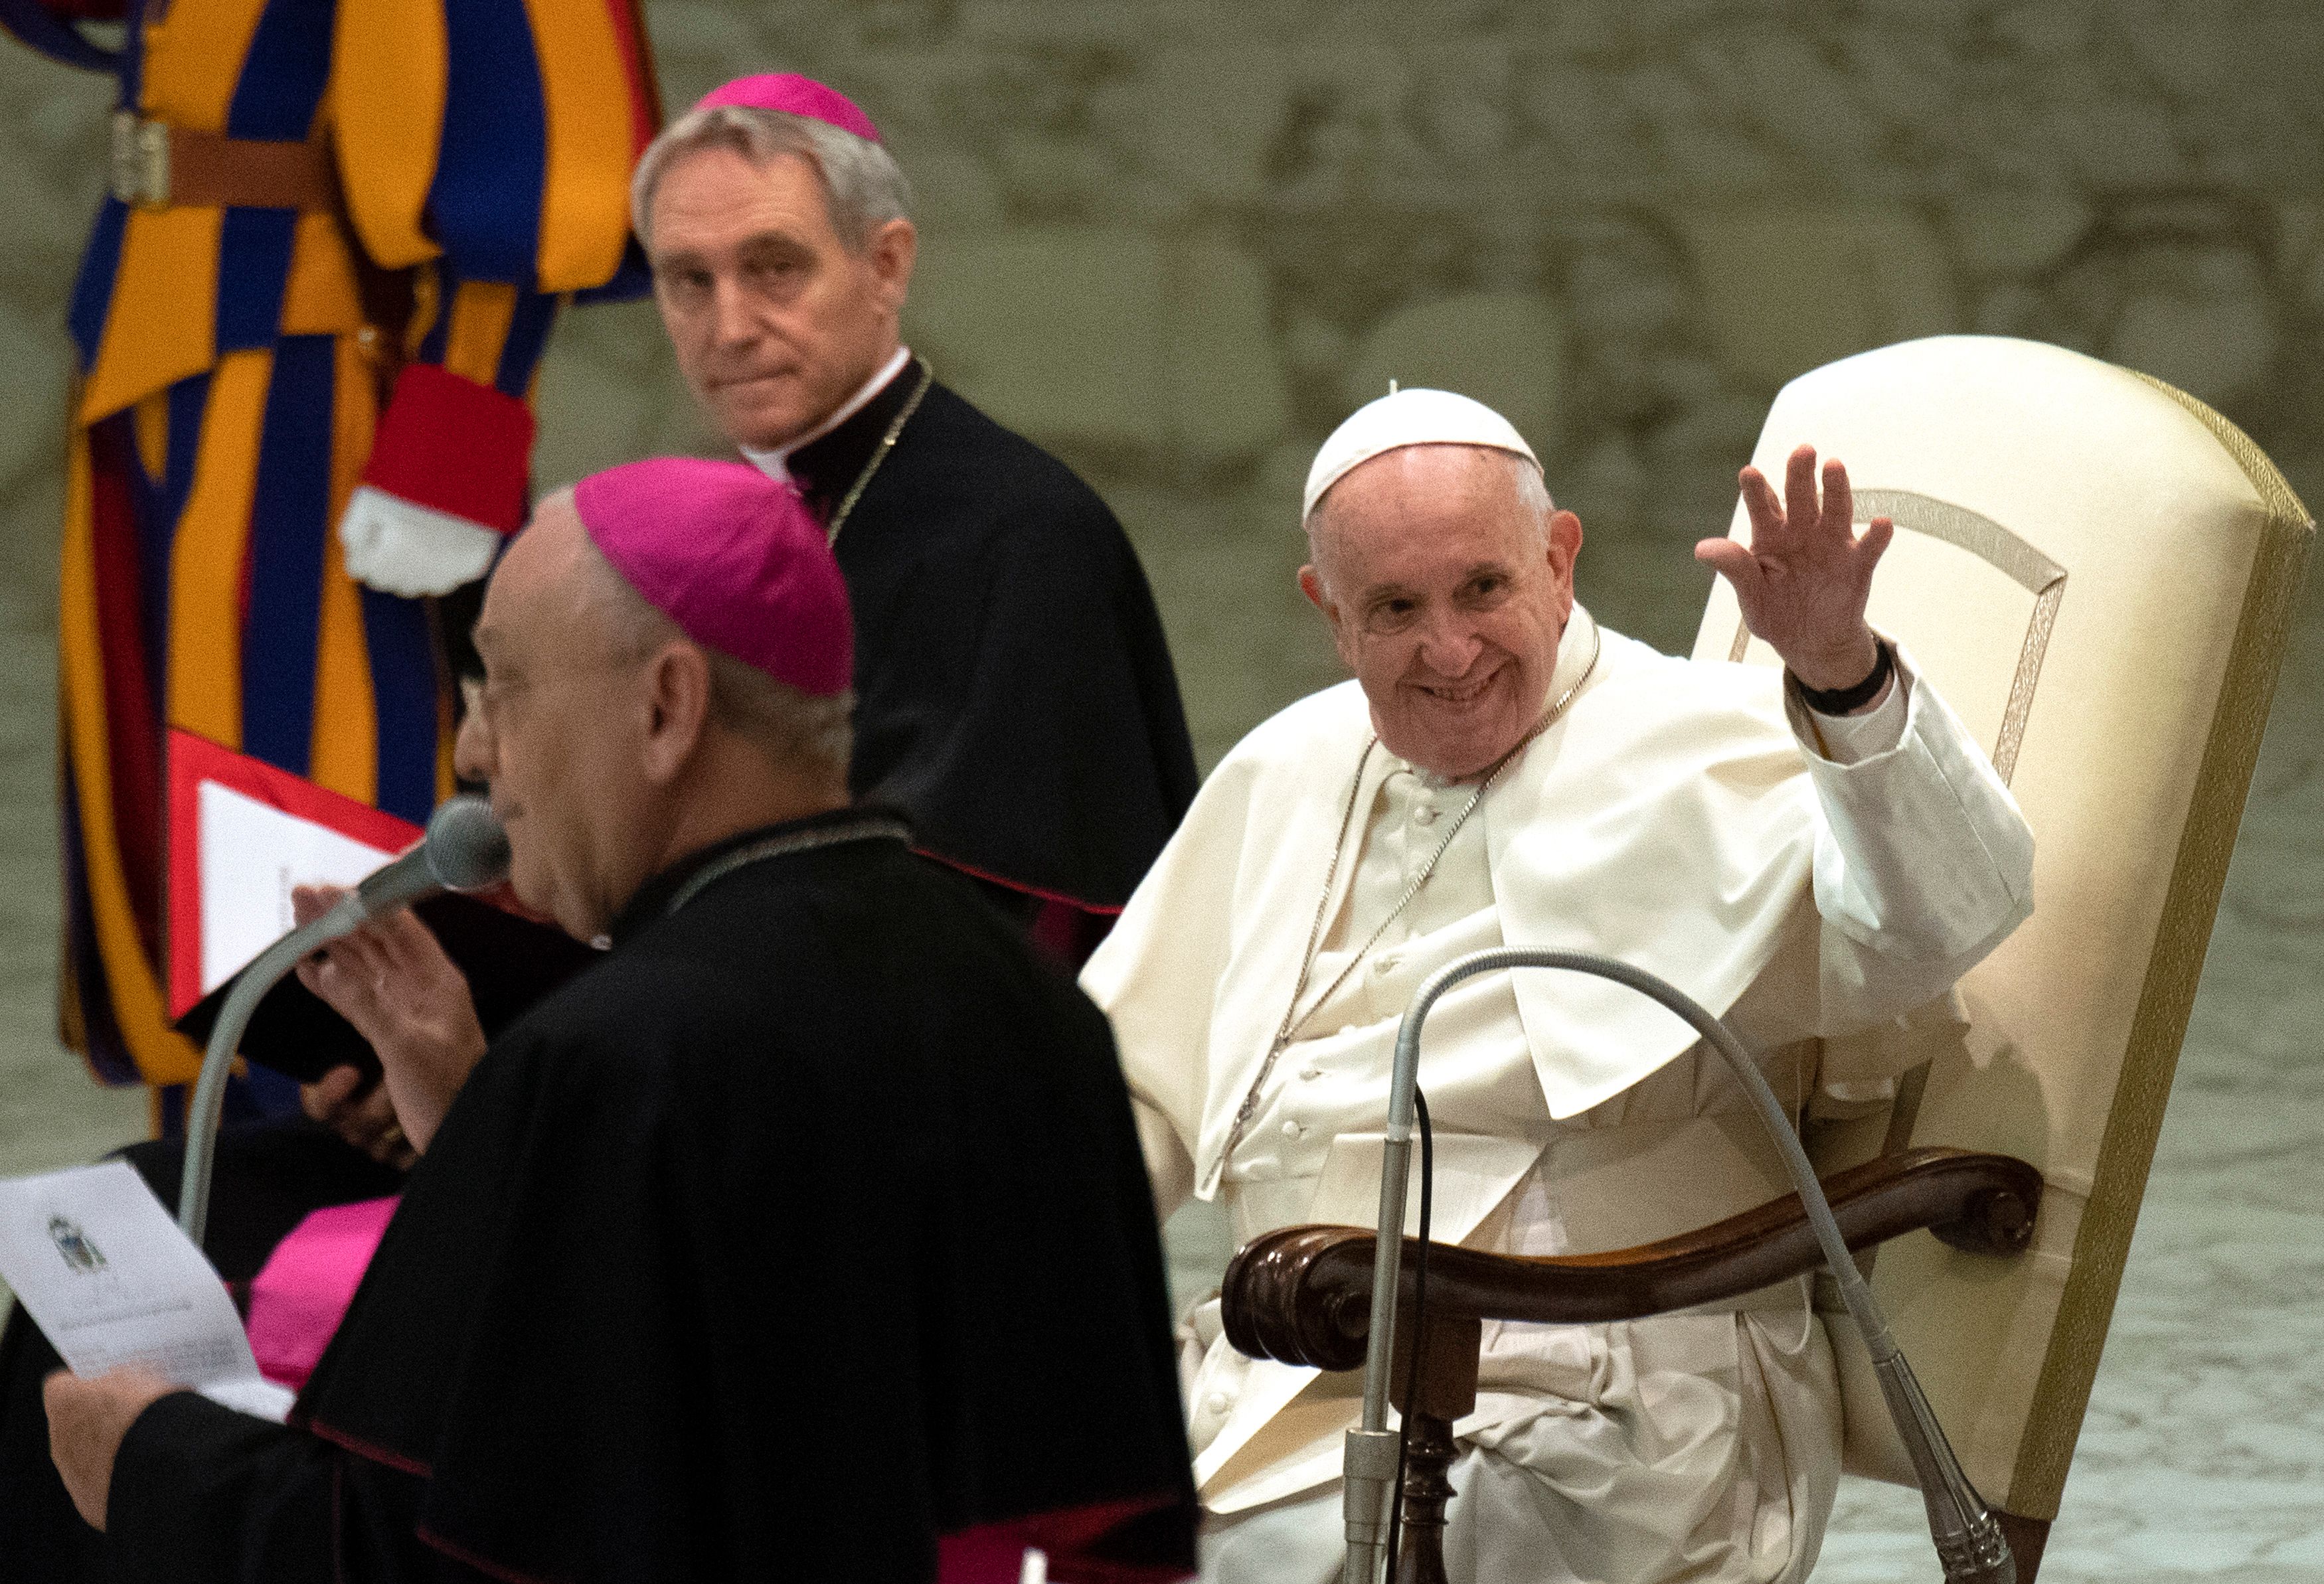 Pope Francis (R) waves before the audience with members of the Molfetta and Ugento dioceses in Paul VI hall at the Vatican on December 1, 2018. (TIZIANA FABI/AFP/Getty Images)